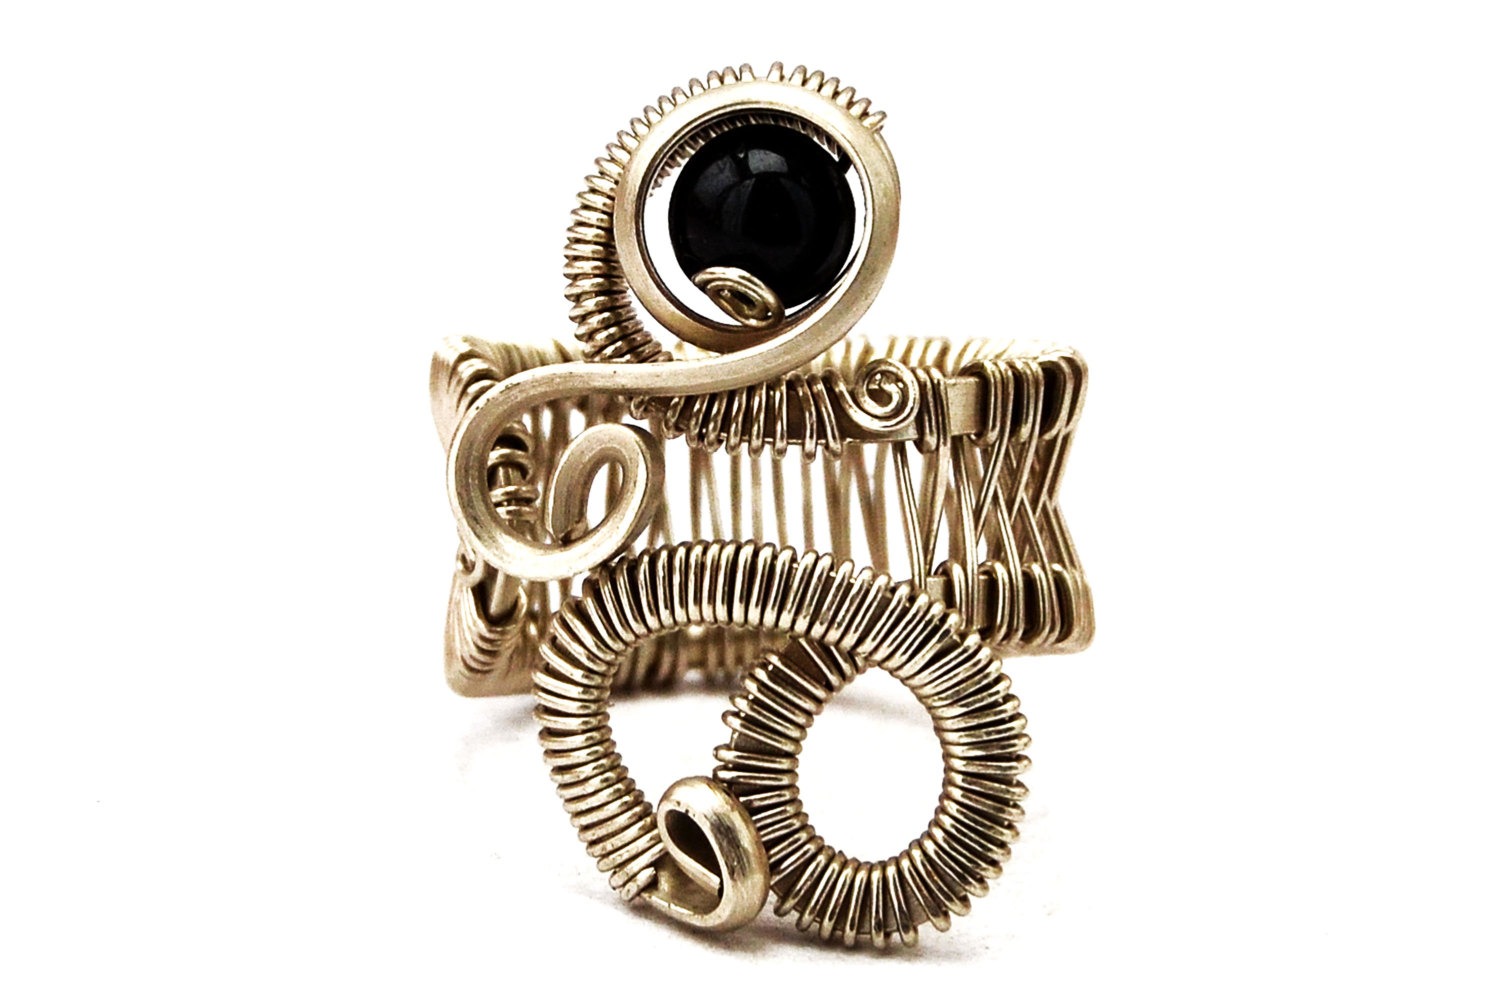 Steampunk Ring Wire Wrap Black Ring Cocktail Ring Gemstone Ring Gothic Ring Onyx Ring Metalwork Ring Silver Wire Ring Stone Ring Womens Ring steampunk buy now online